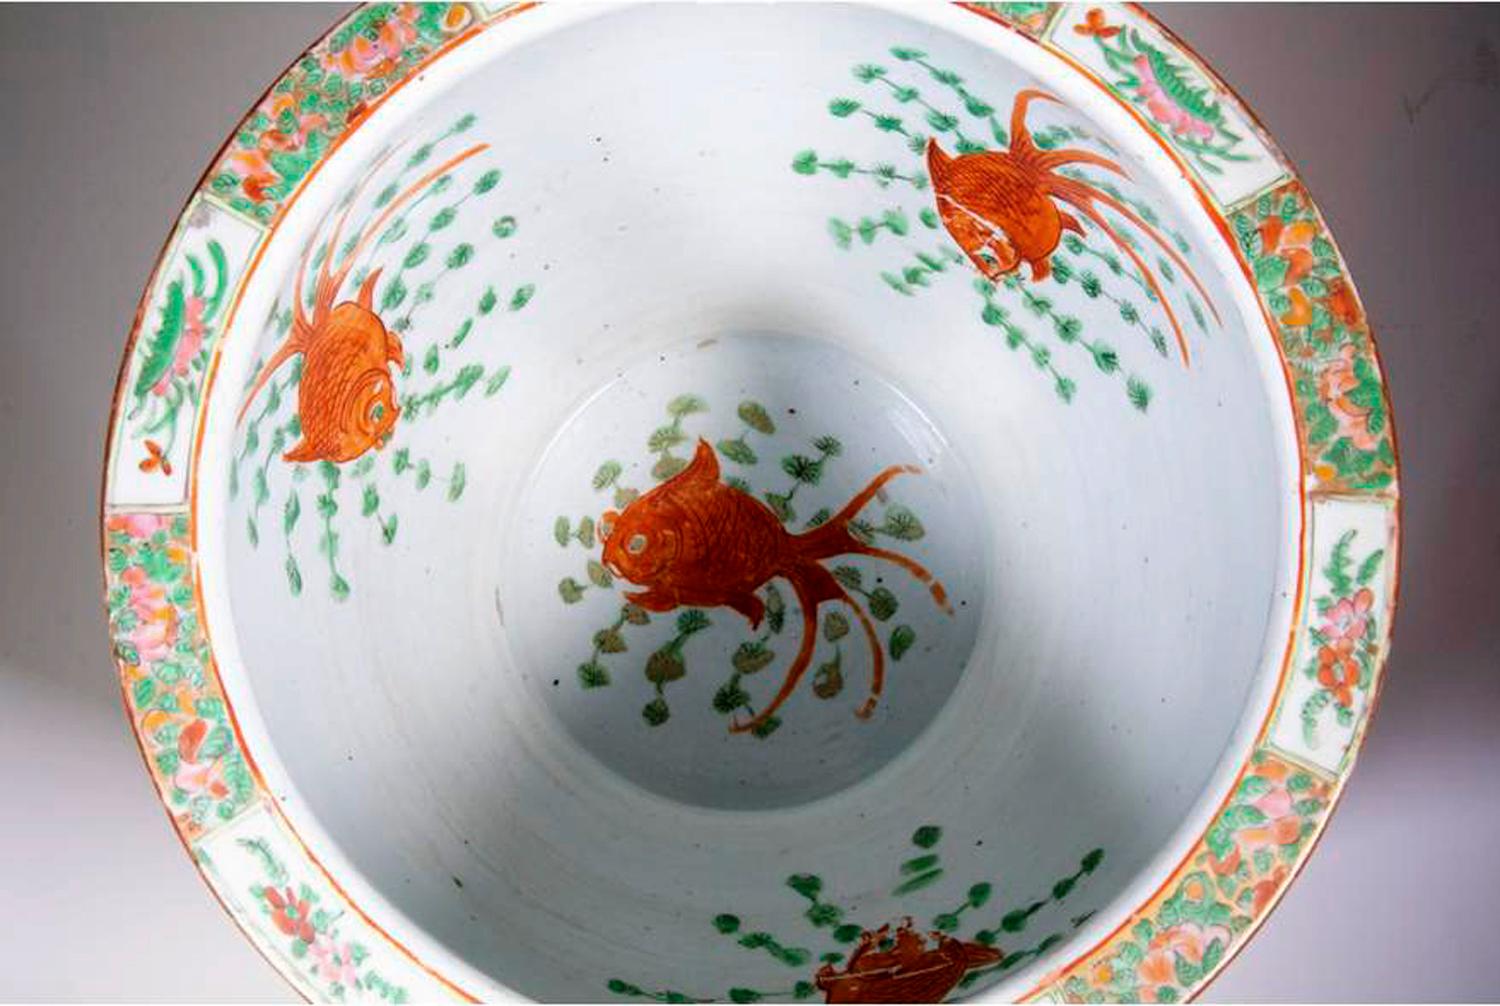 Chinese export porcelain rose medallion fish bowl or Jardiniere,
Mid-19th century.

The Chinese export porcelain circular fish bowl or jardiniere is painted with alternating panels of figures and birds on a dense green rose medallion ground.